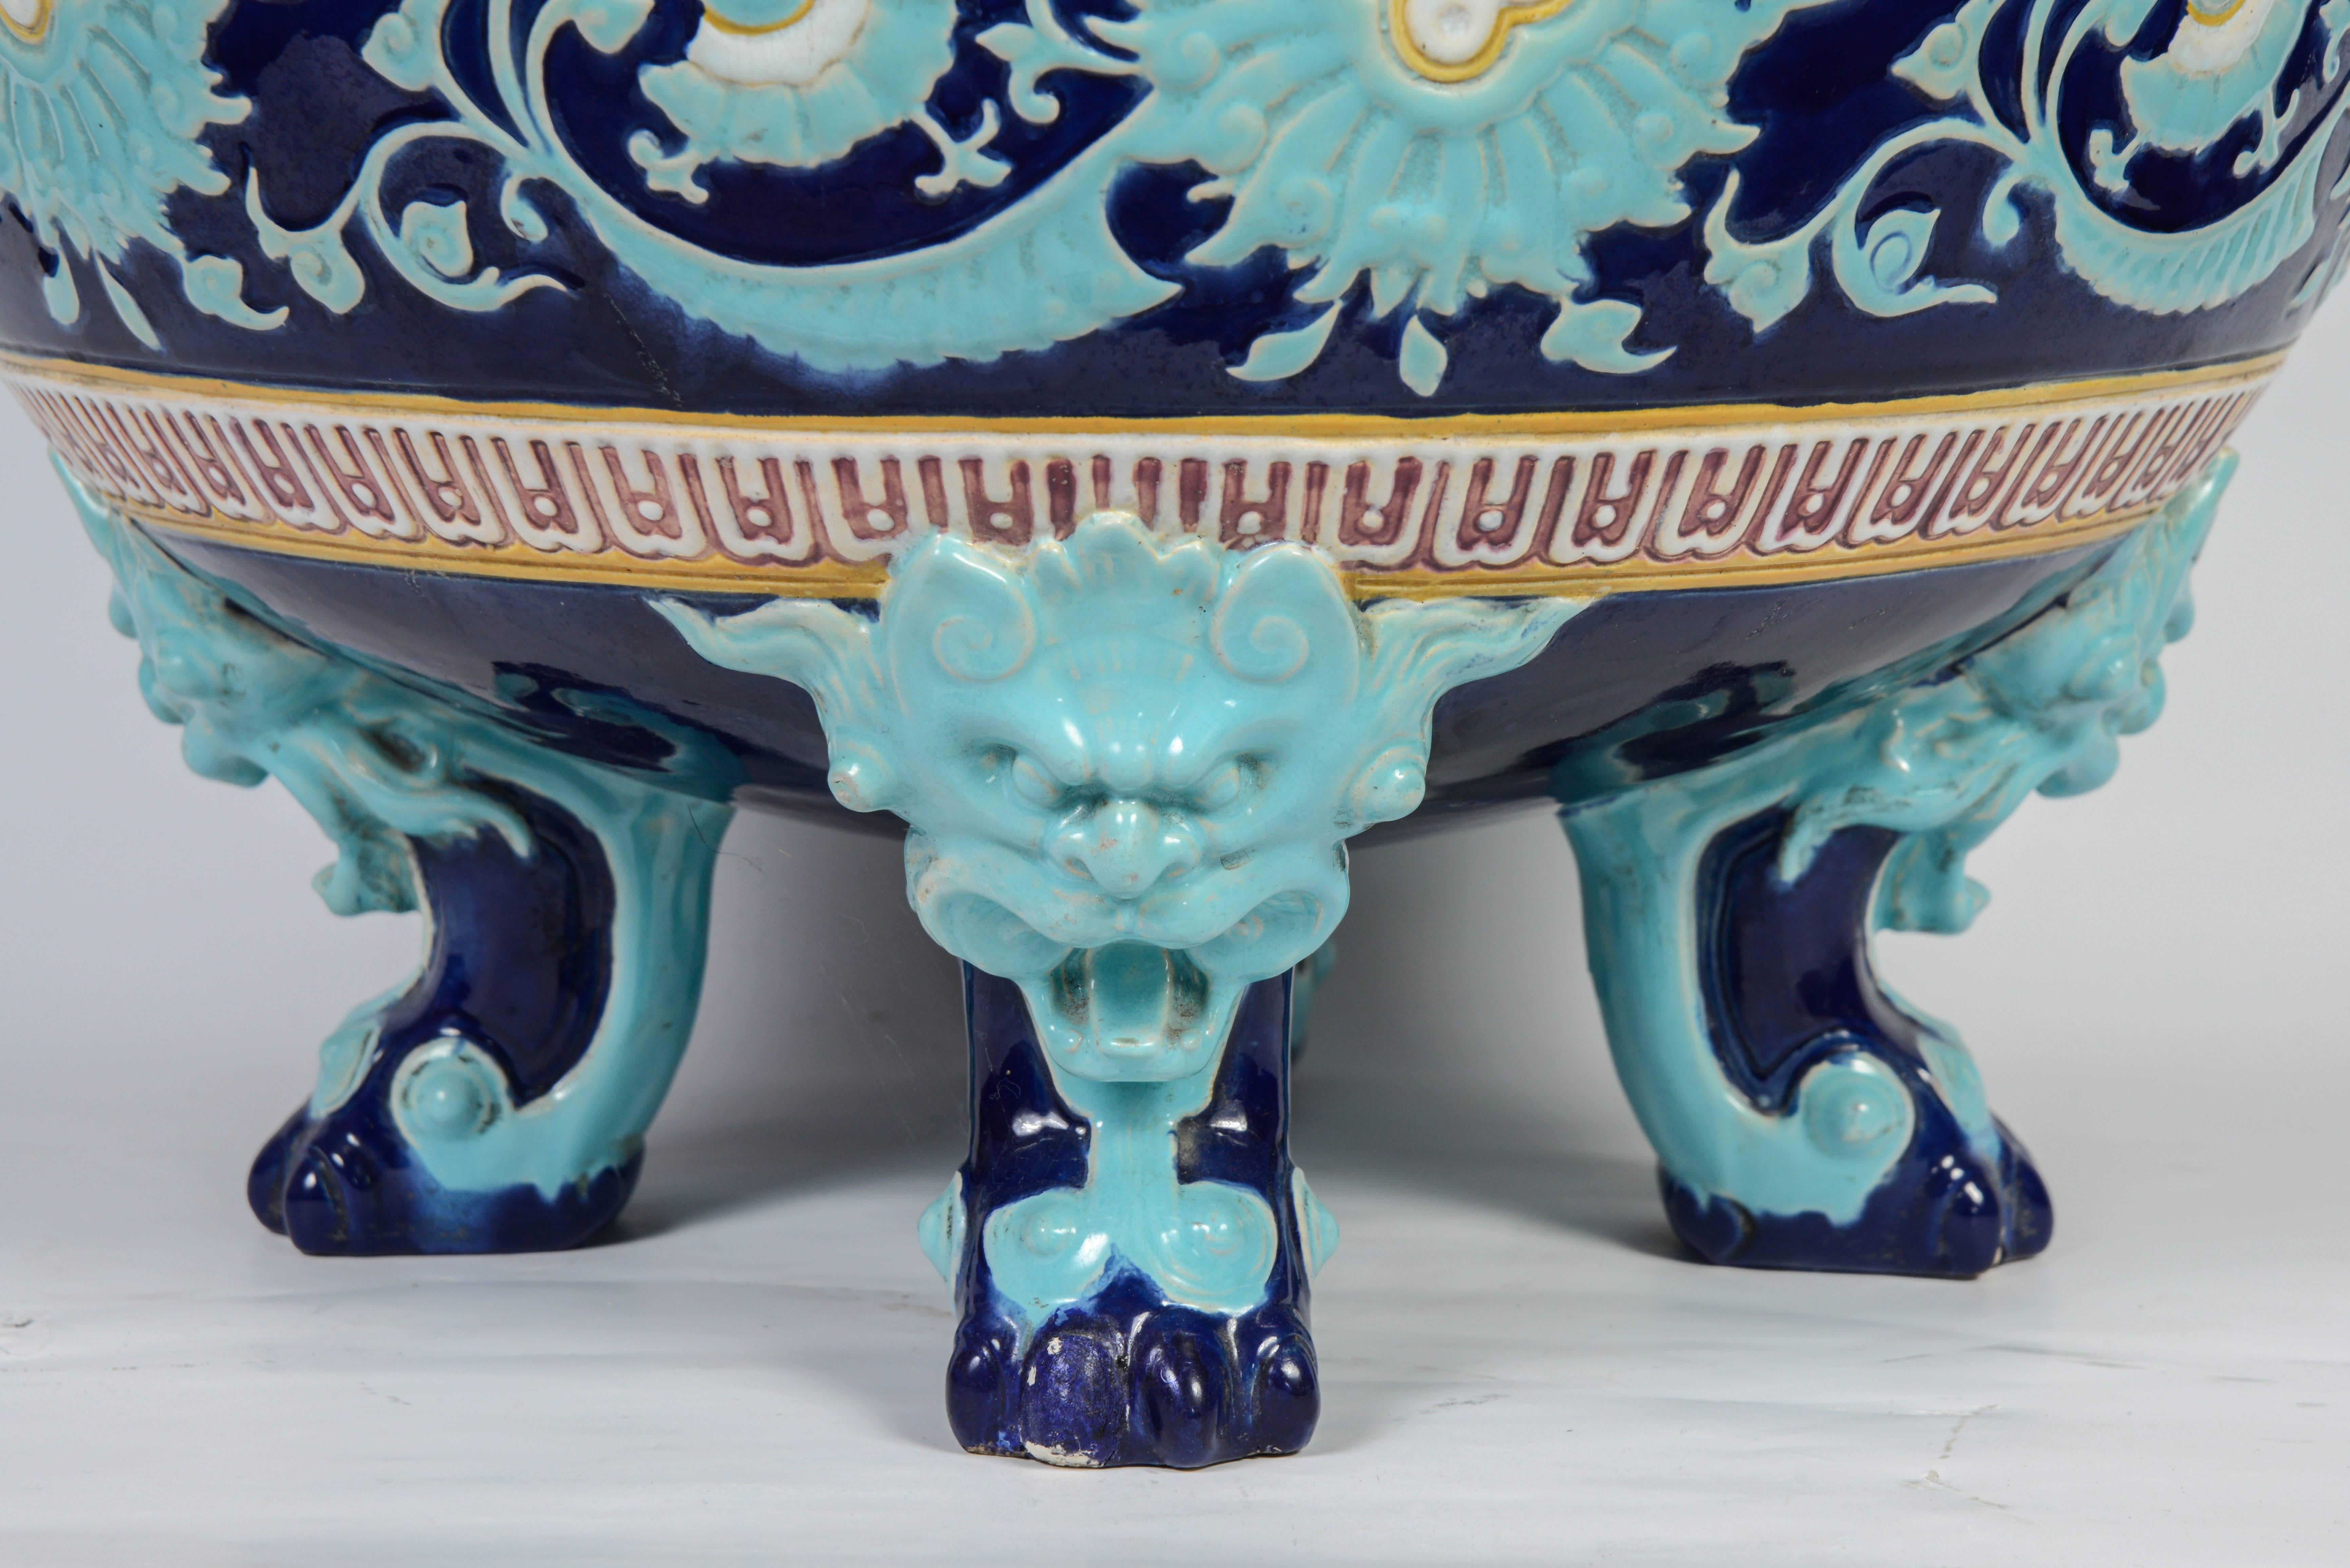 Japanese style planter in ceramic with glaze cover from the Minton English Factory made in 1893 for the Universal Exhibition of Chicago.
The body rests on three zoomorphic feet with dark turquoise blue and blue hybrid figures evoking creatures from